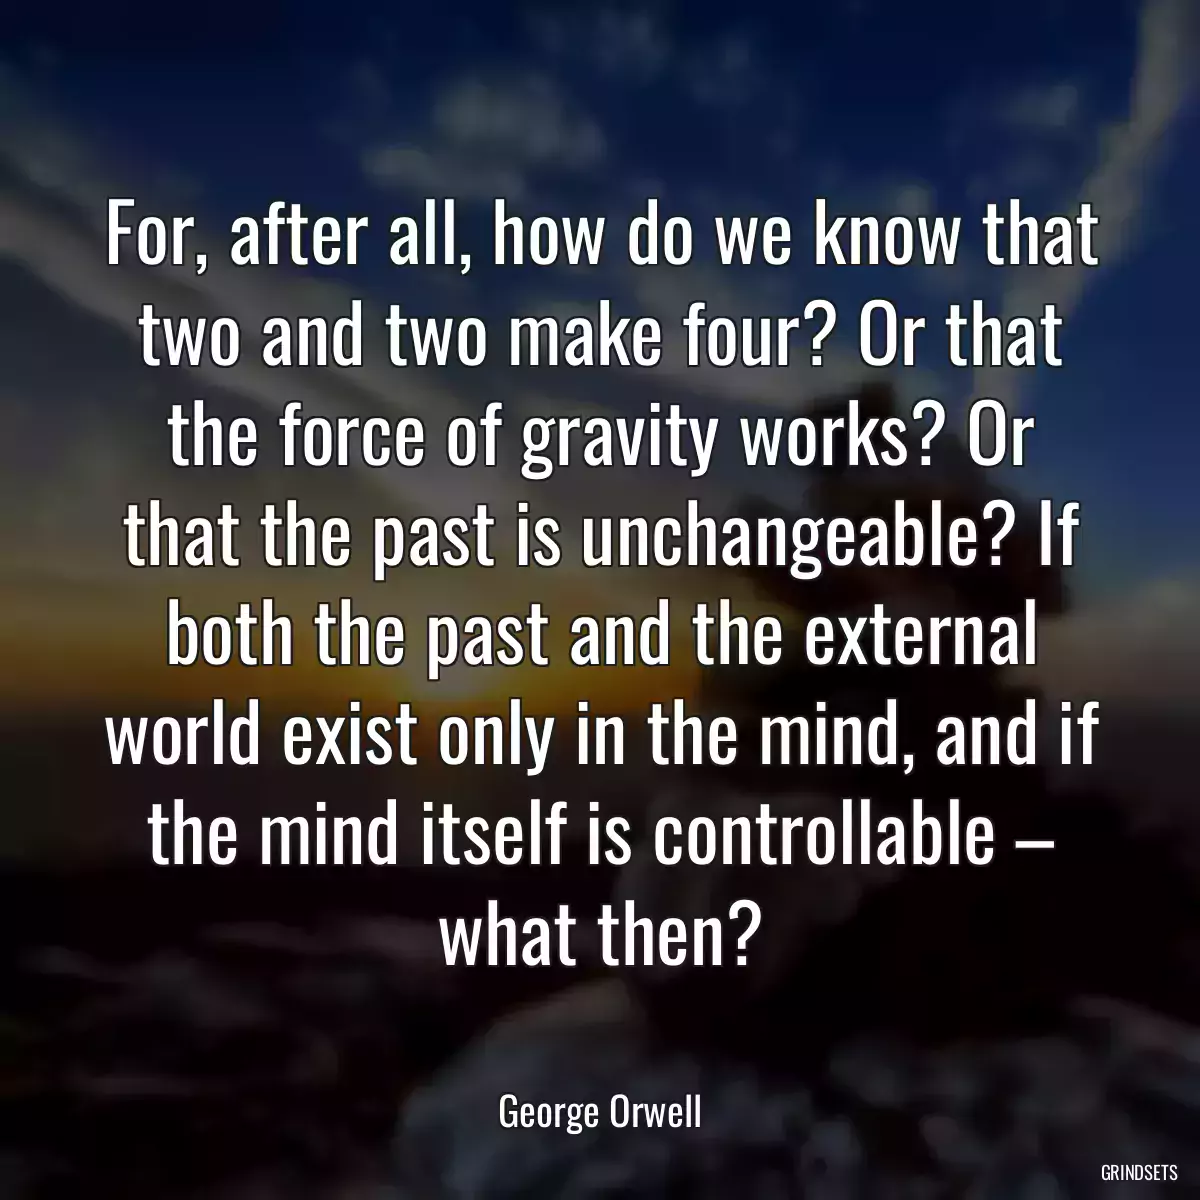 For, after all, how do we know that two and two make four? Or that the force of gravity works? Or that the past is unchangeable? If both the past and the external world exist only in the mind, and if the mind itself is controllable – what then?